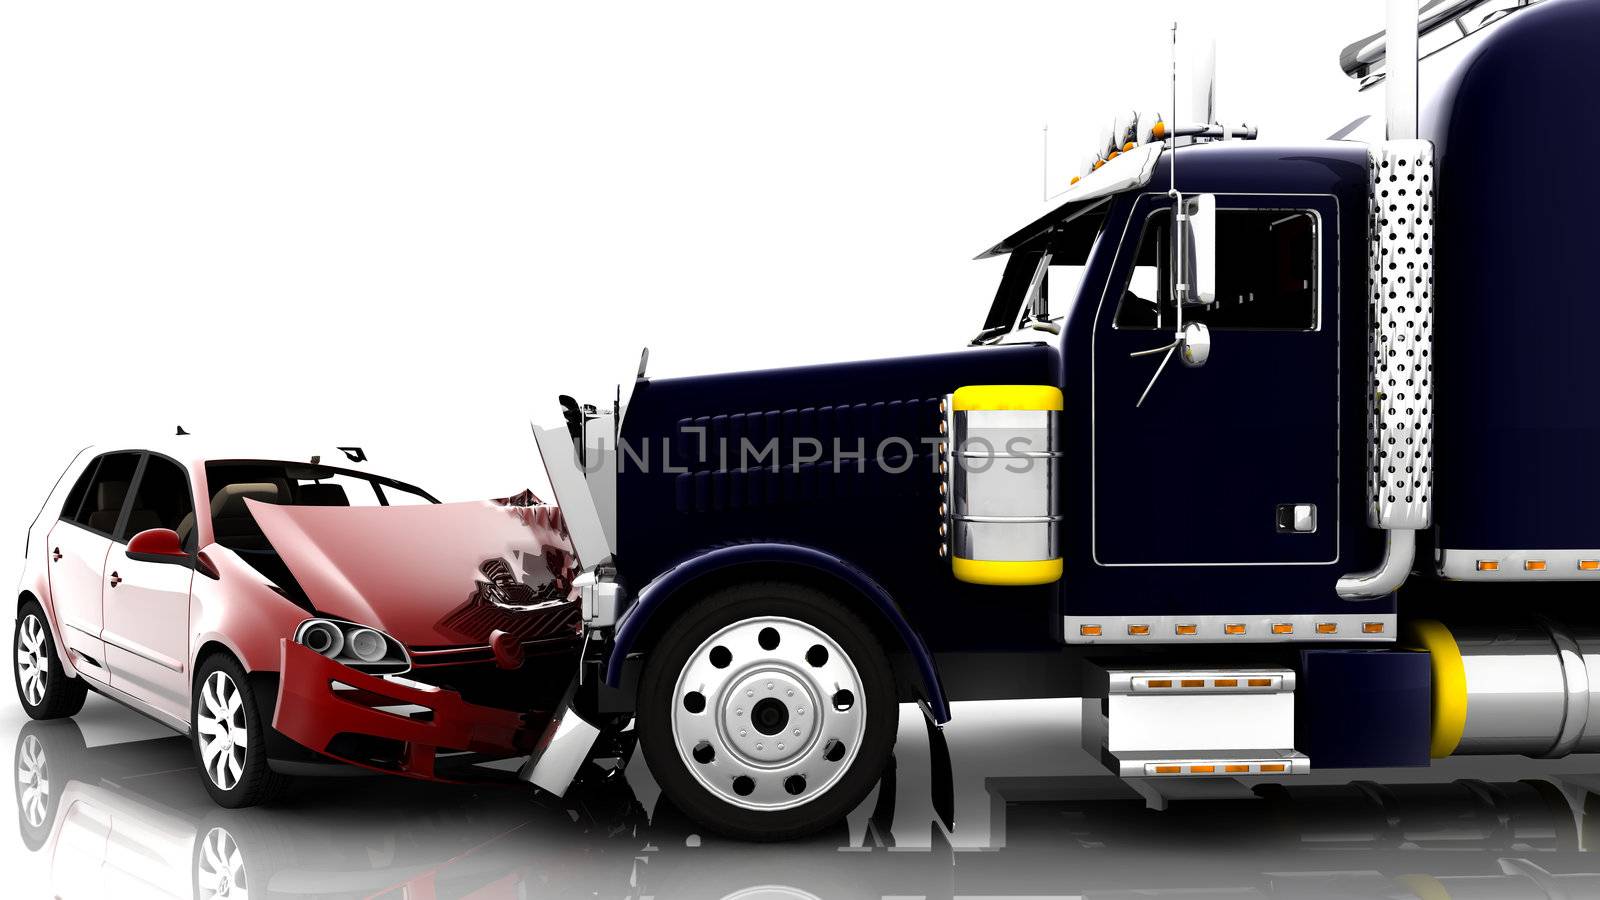 An accident between a red car and a truck